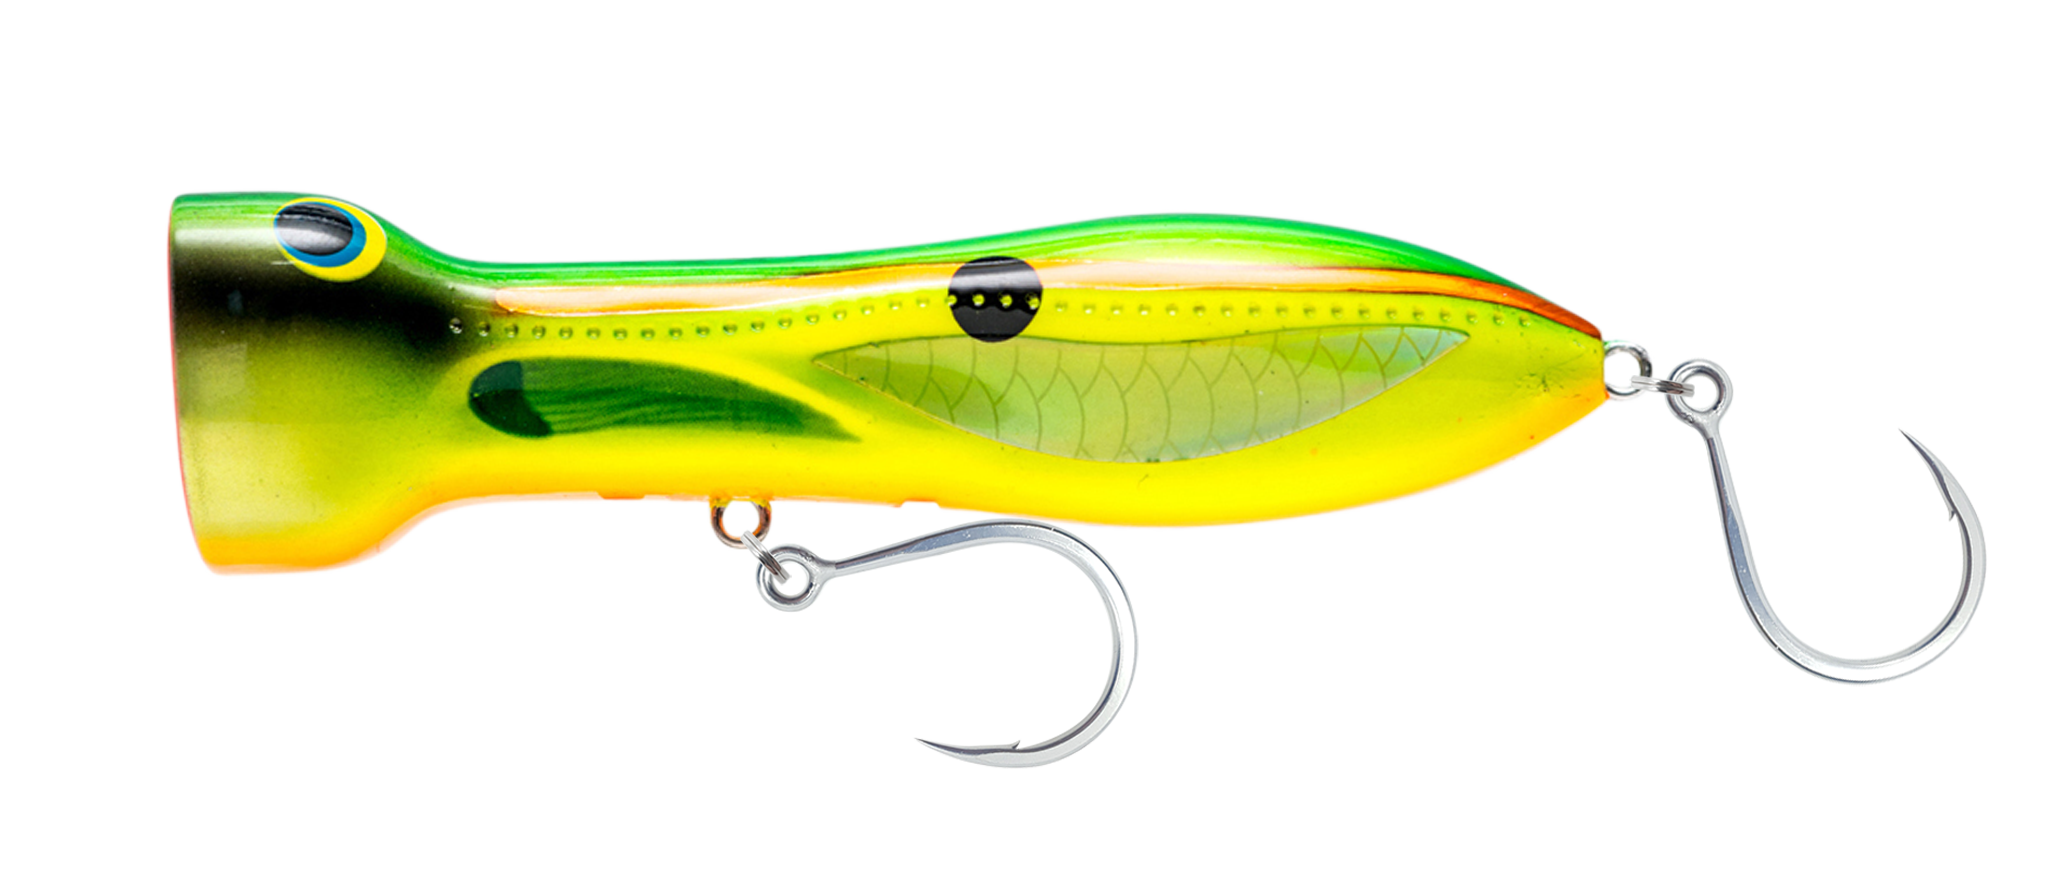 Nomad Design Chug Norris Popper - Offshore Saltwater Fishing Lure with  Hydrodynamic Design